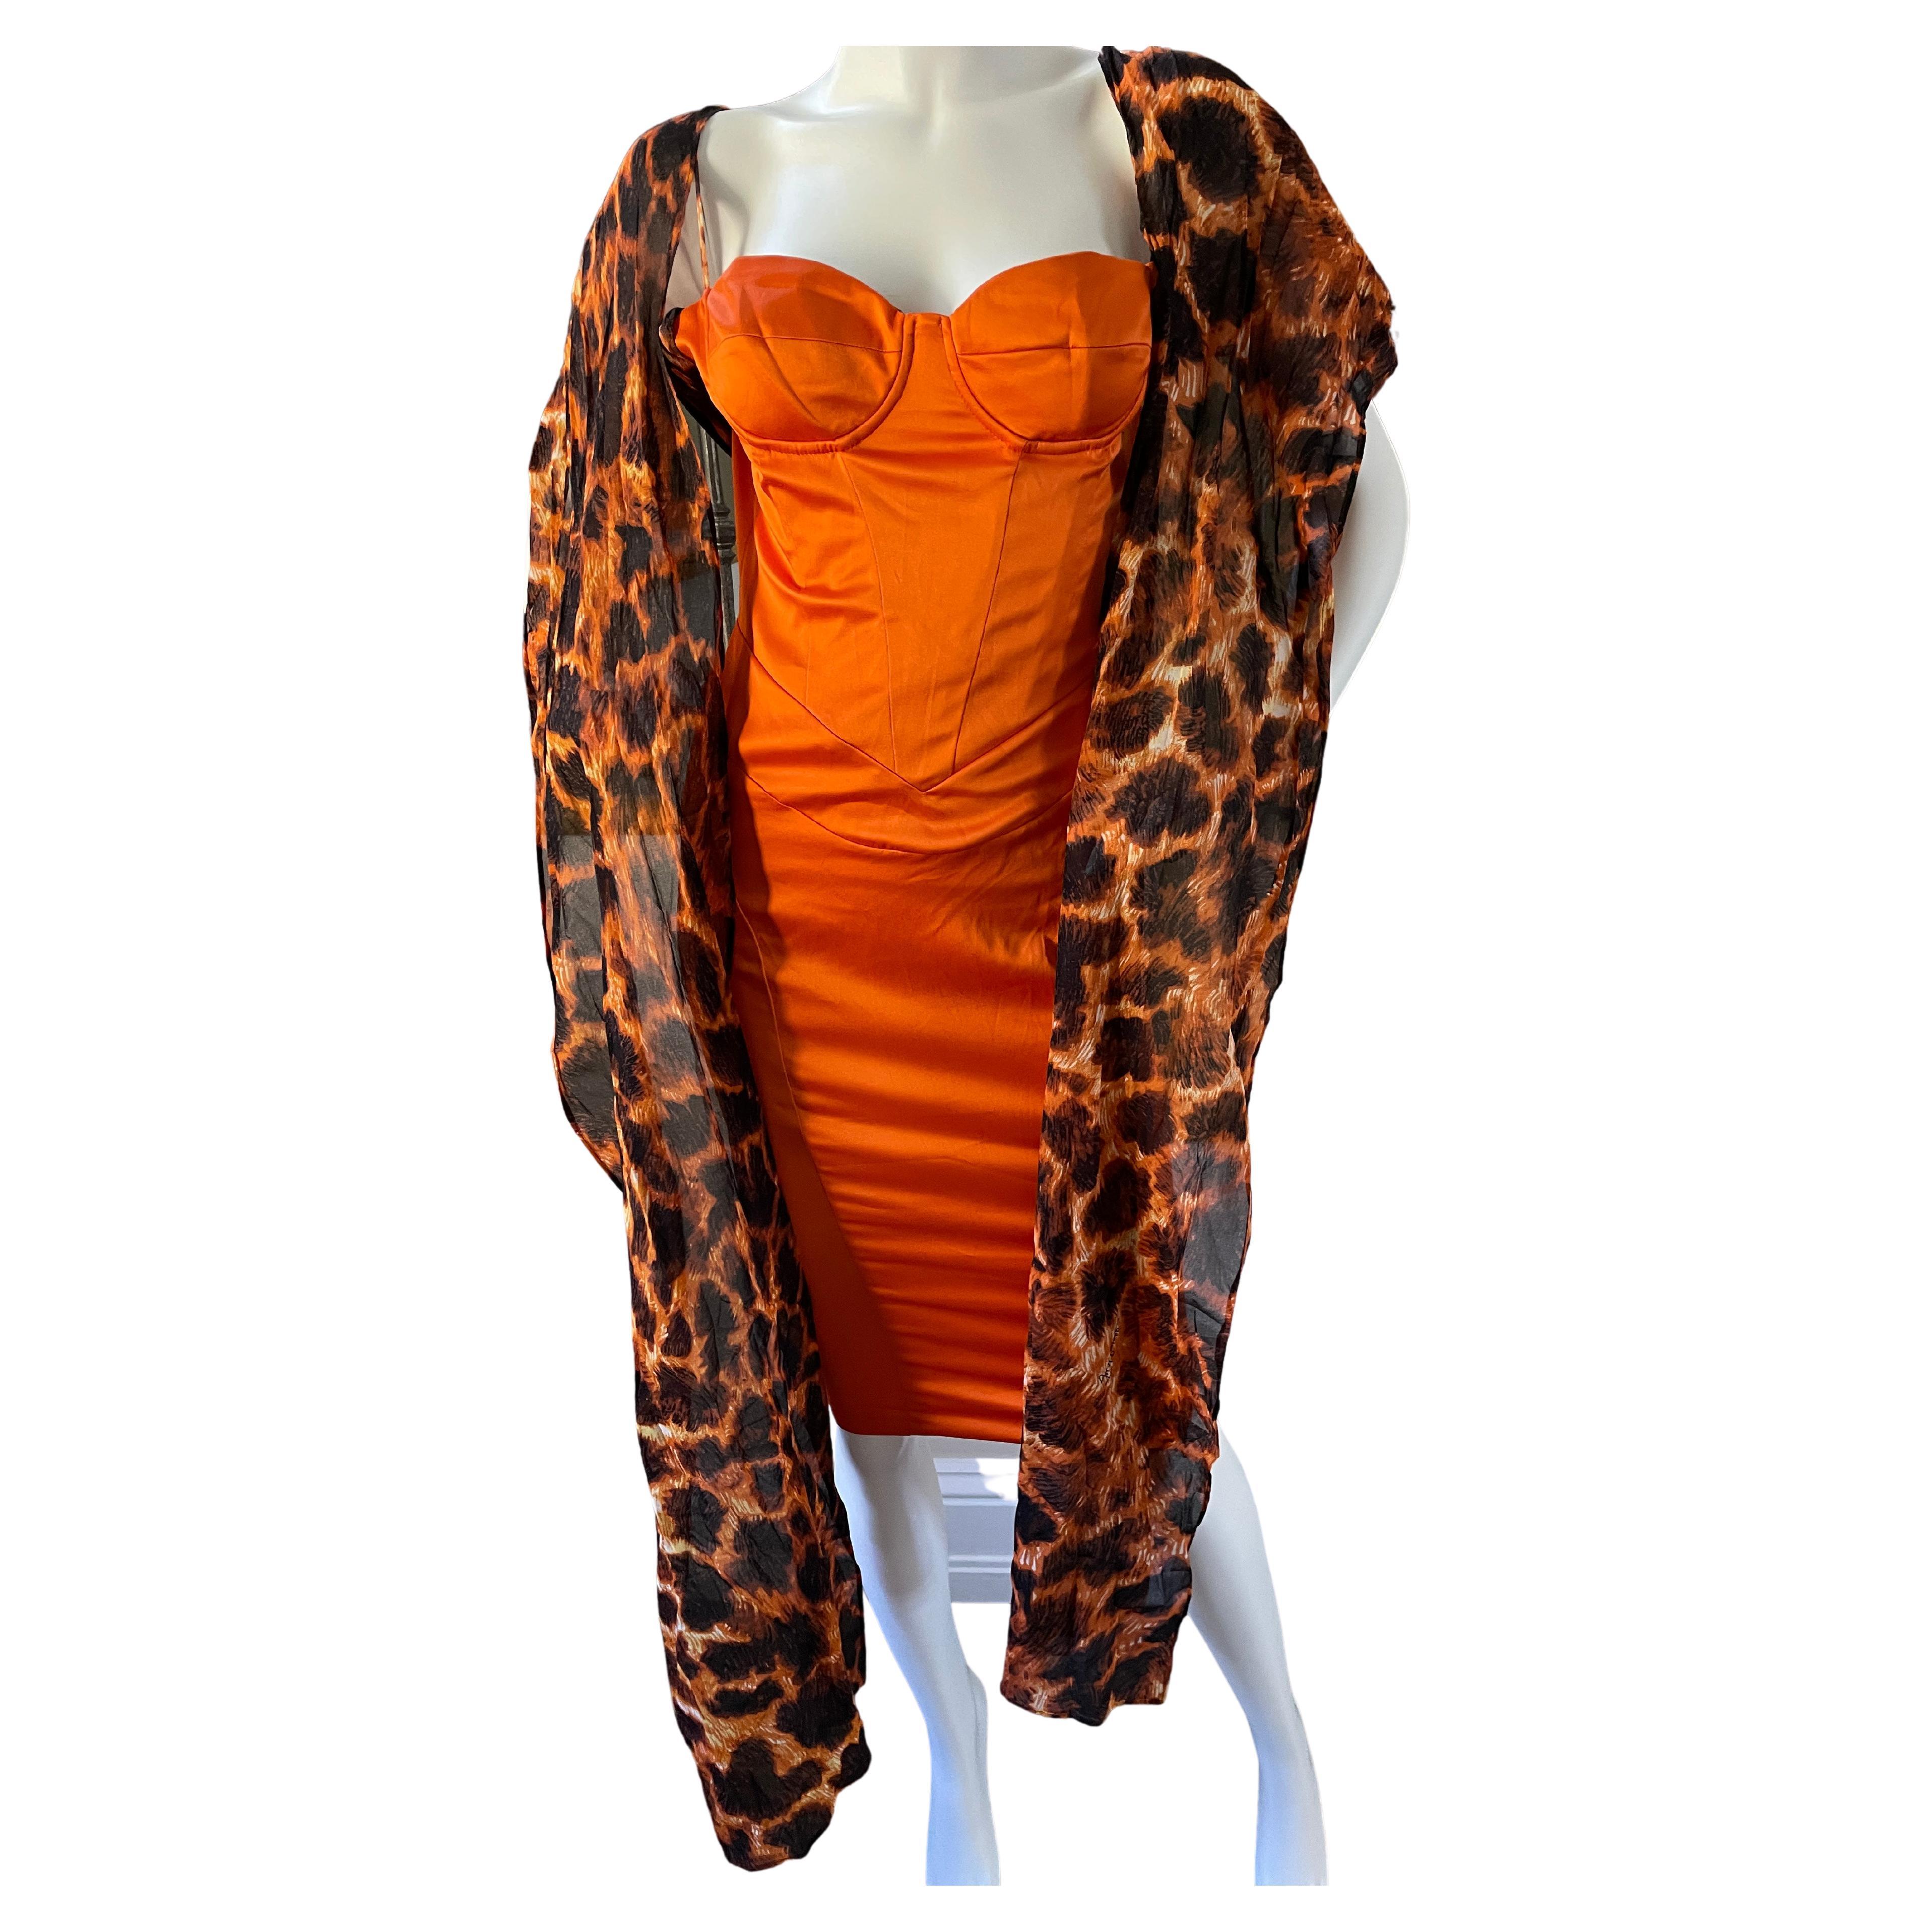 Just Cavalli Vintage Orange Corset Dress with Attached Animal Print Scarves For Sale